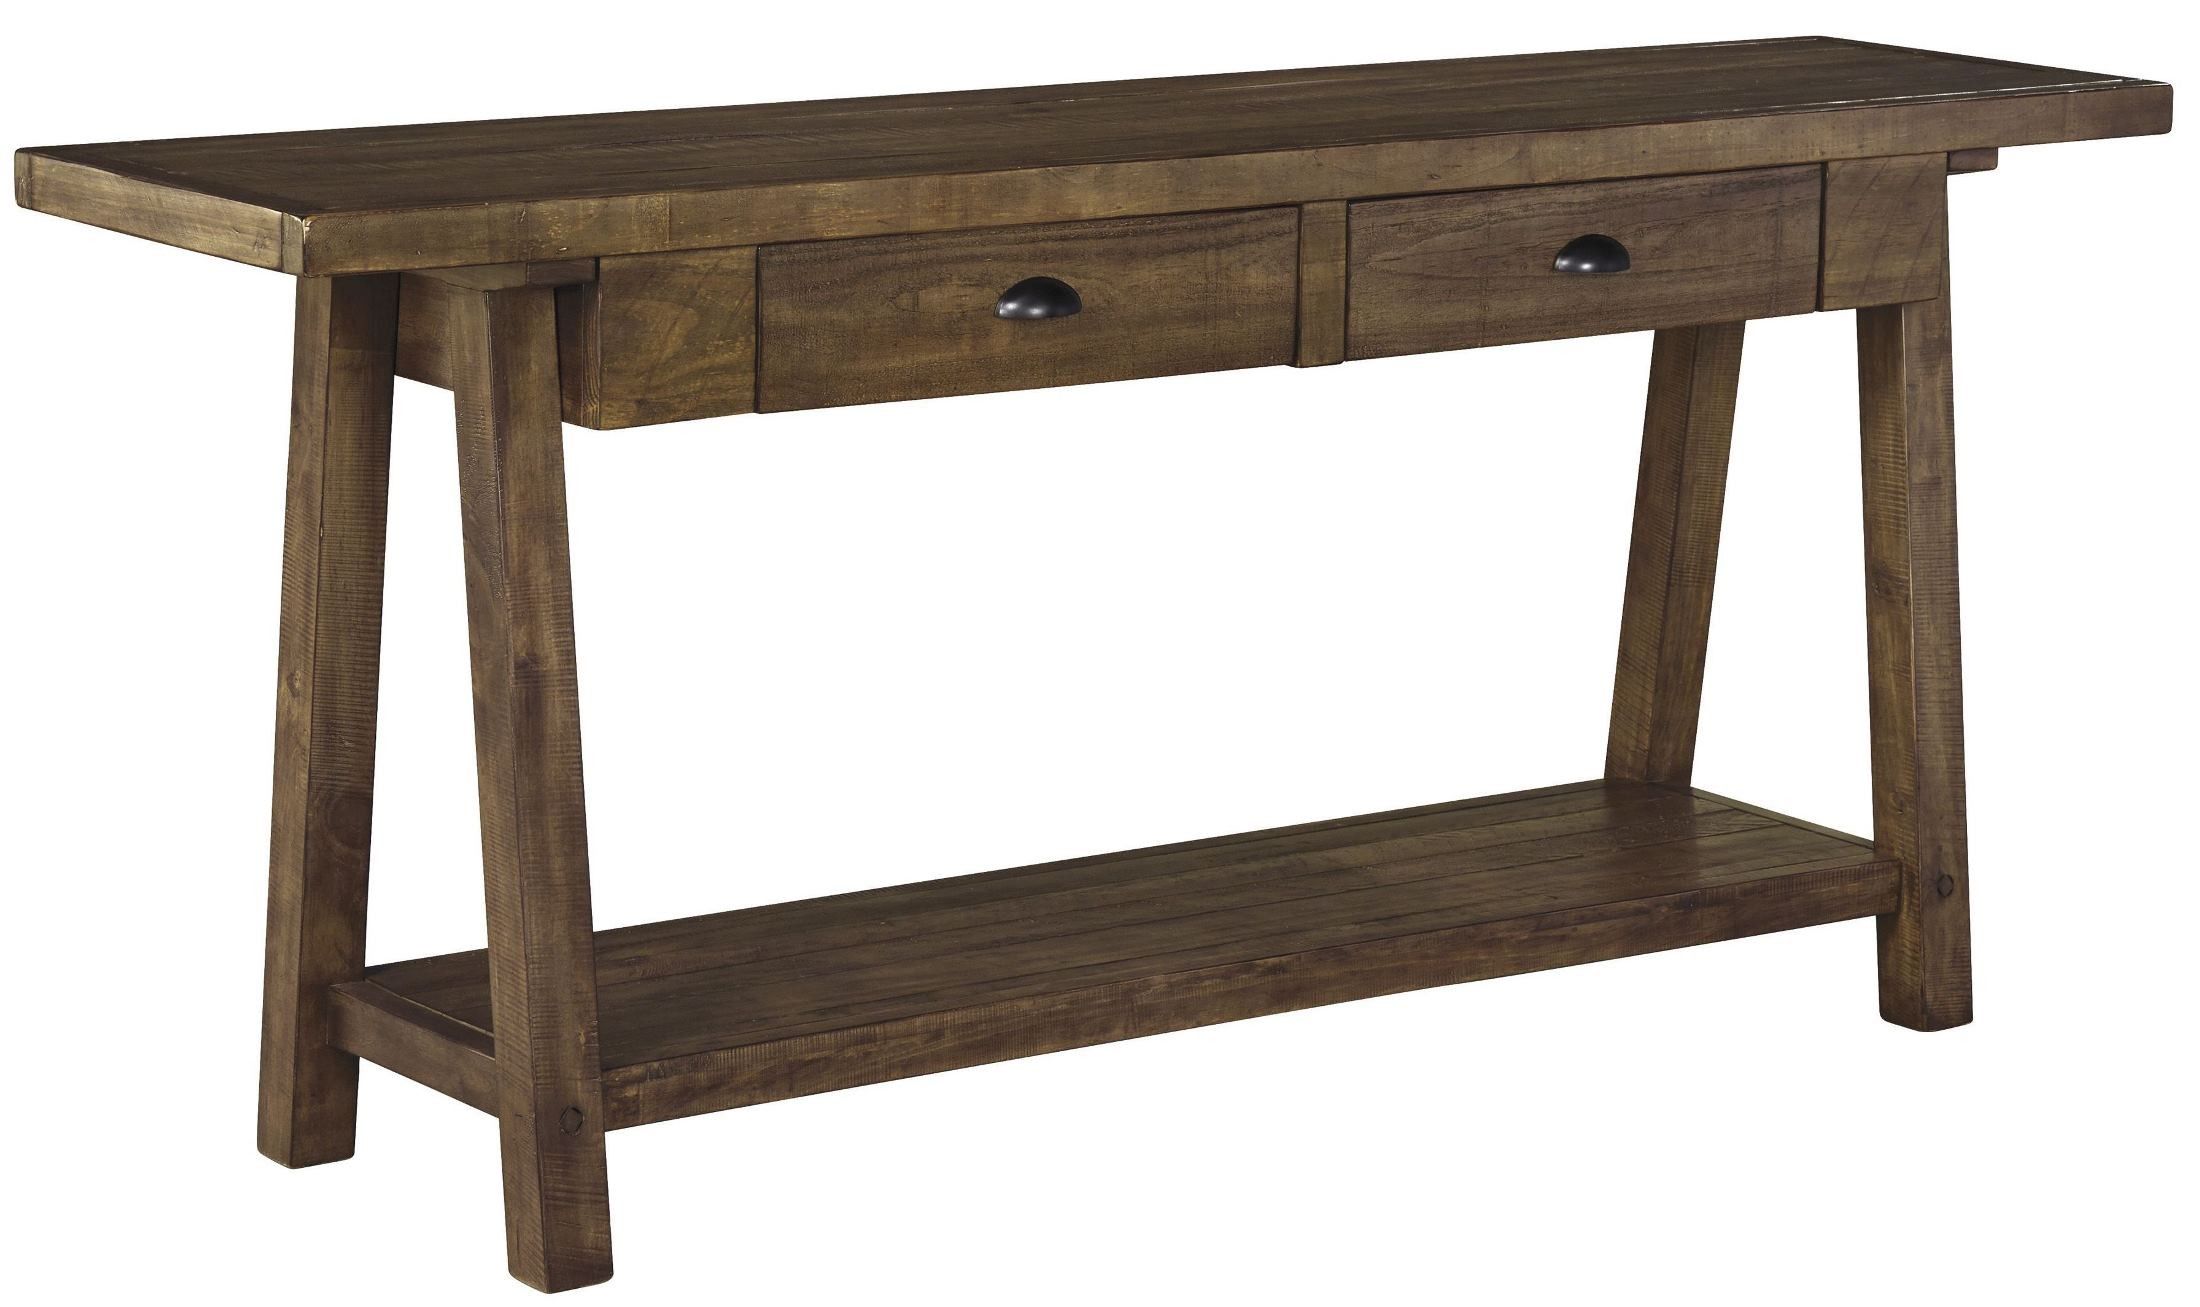 Dondie Rustic Brown Sofa Table From Ashley | Coleman Furniture Within Rustic Barnside Console Tables (View 9 of 20)